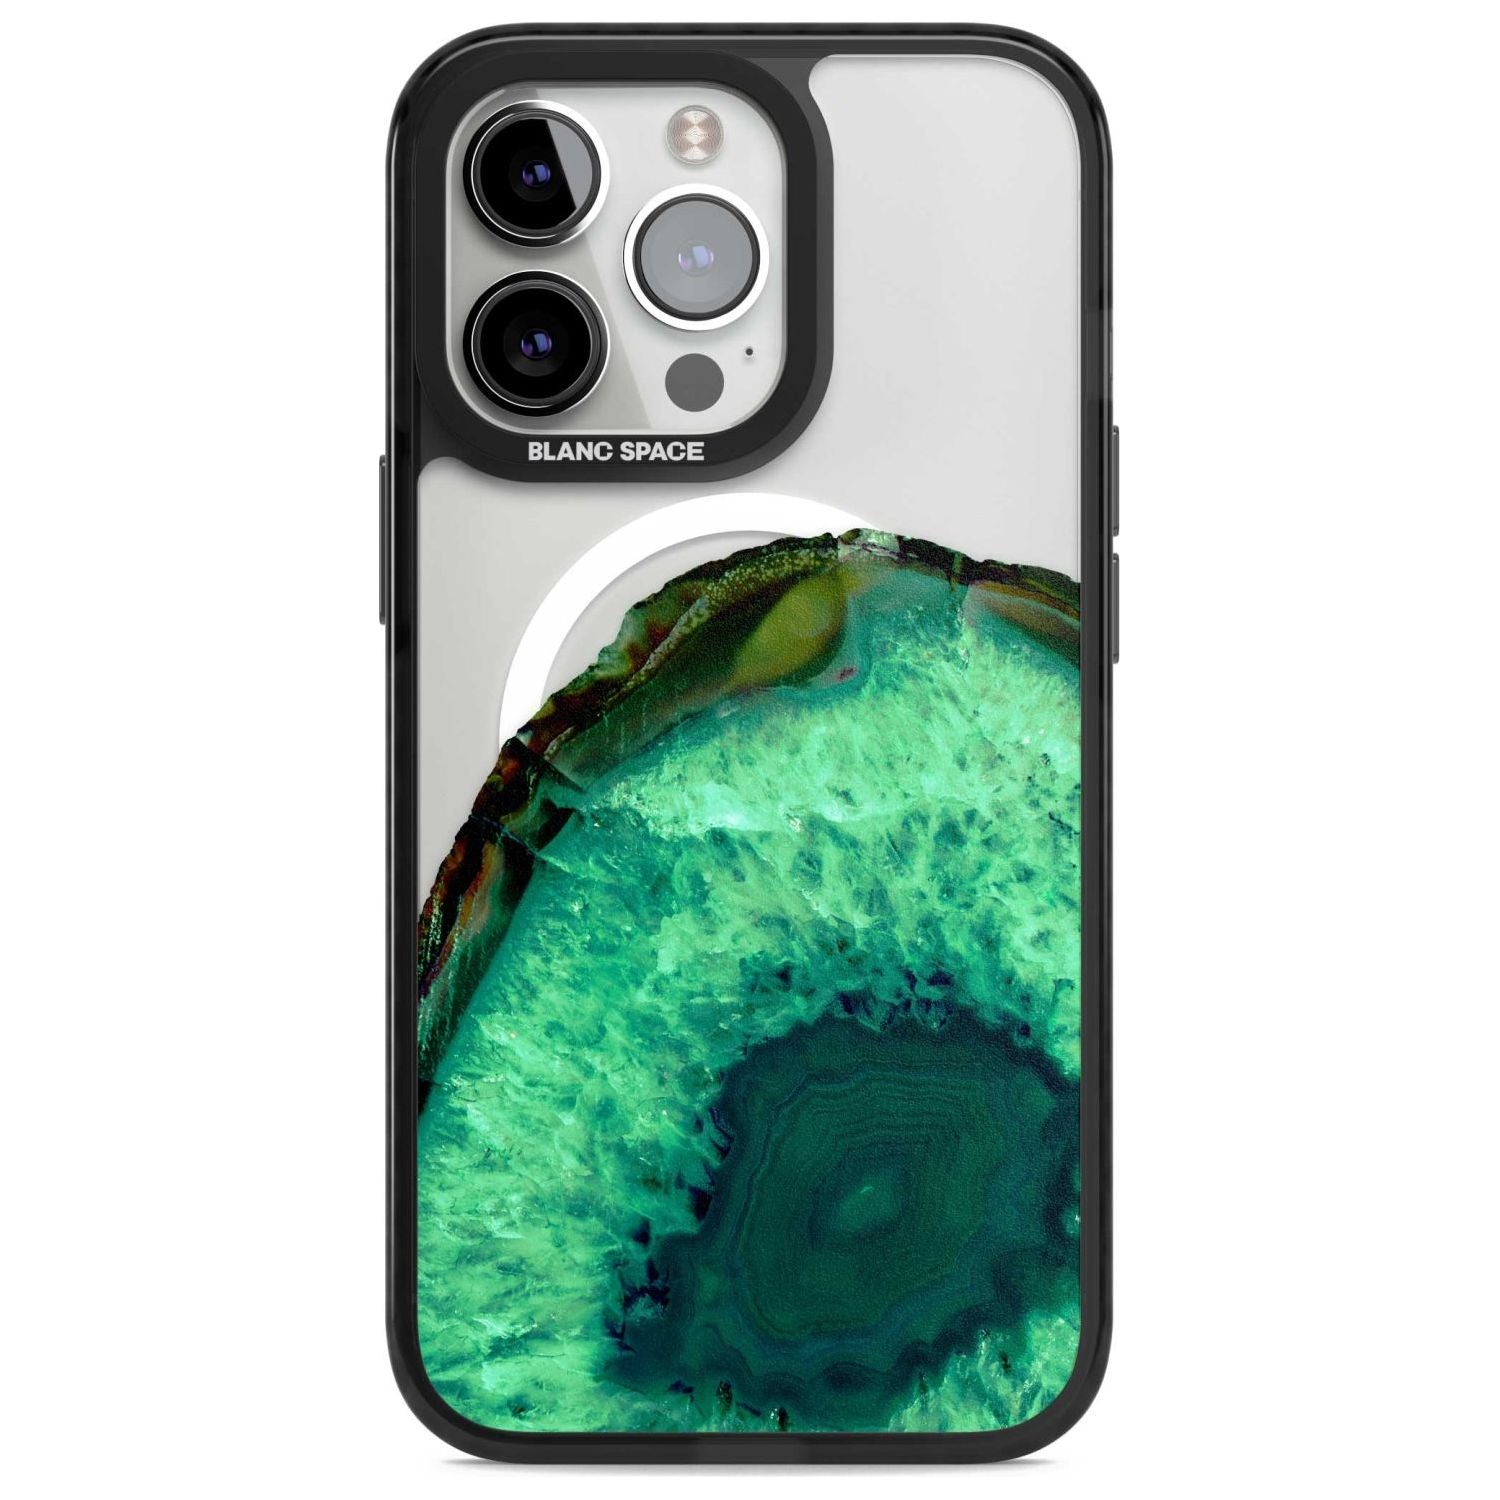 Emerald Green Gemstone Crystal Clear Design Phone Case iPhone 15 Pro Max / Magsafe Black Impact Case,iPhone 15 Pro / Magsafe Black Impact Case,iPhone 14 Pro Max / Magsafe Black Impact Case,iPhone 14 Pro / Magsafe Black Impact Case,iPhone 13 Pro / Magsafe Black Impact Case Blanc Space